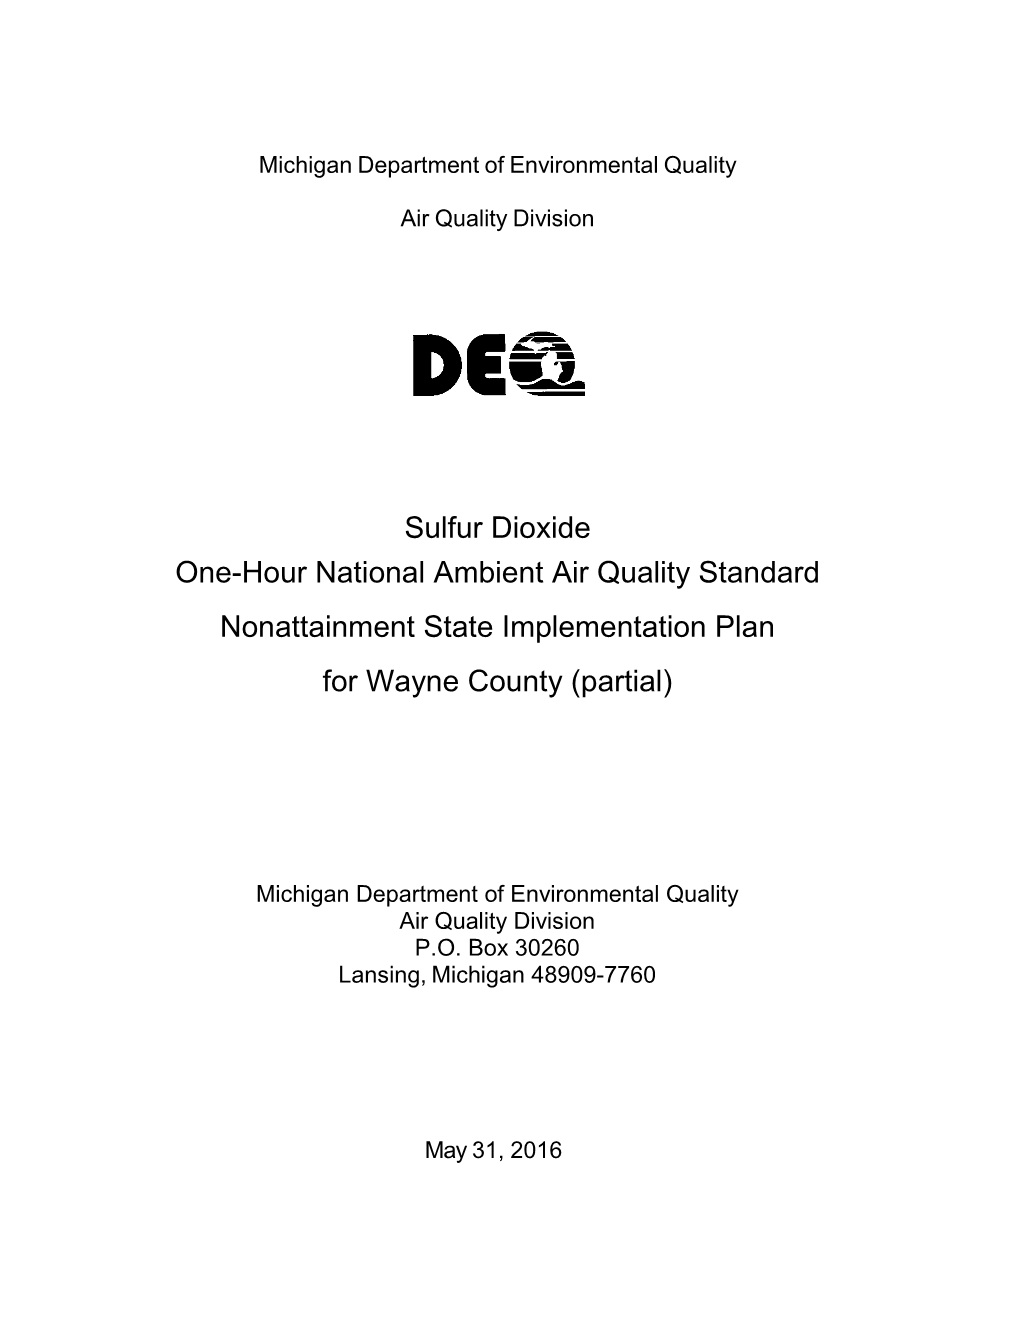 Sulfur Dioxide One-Hour National Ambient Air Quality Standard Nonattainment State Implementation Plan for Wayne County (Partial)